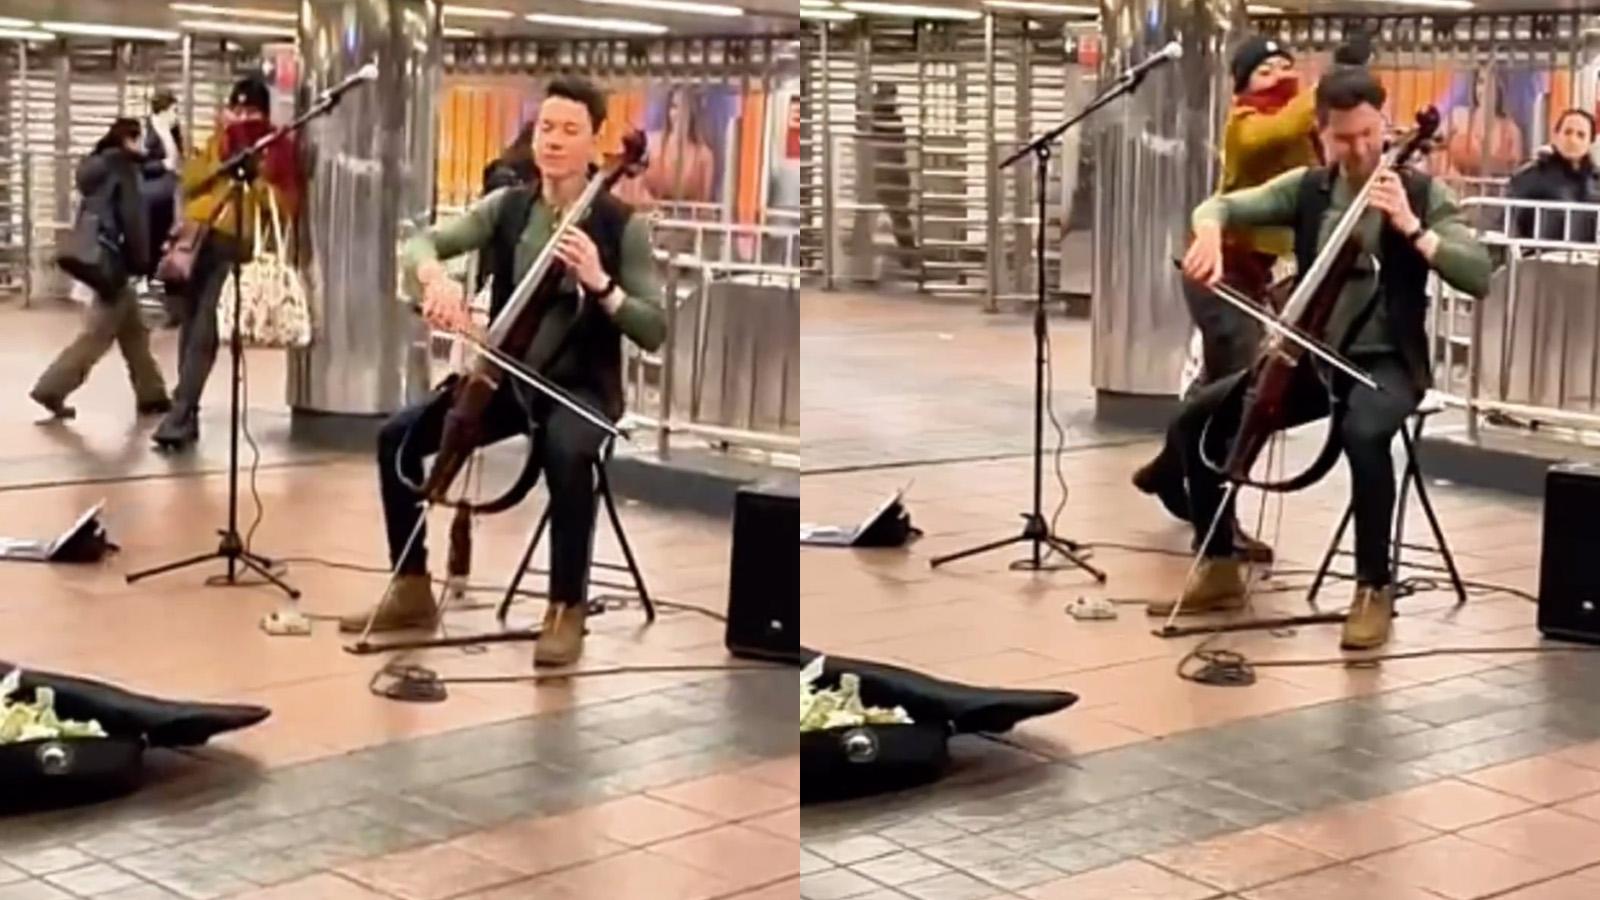 nyc woman arrested for allegedly attacking cellist